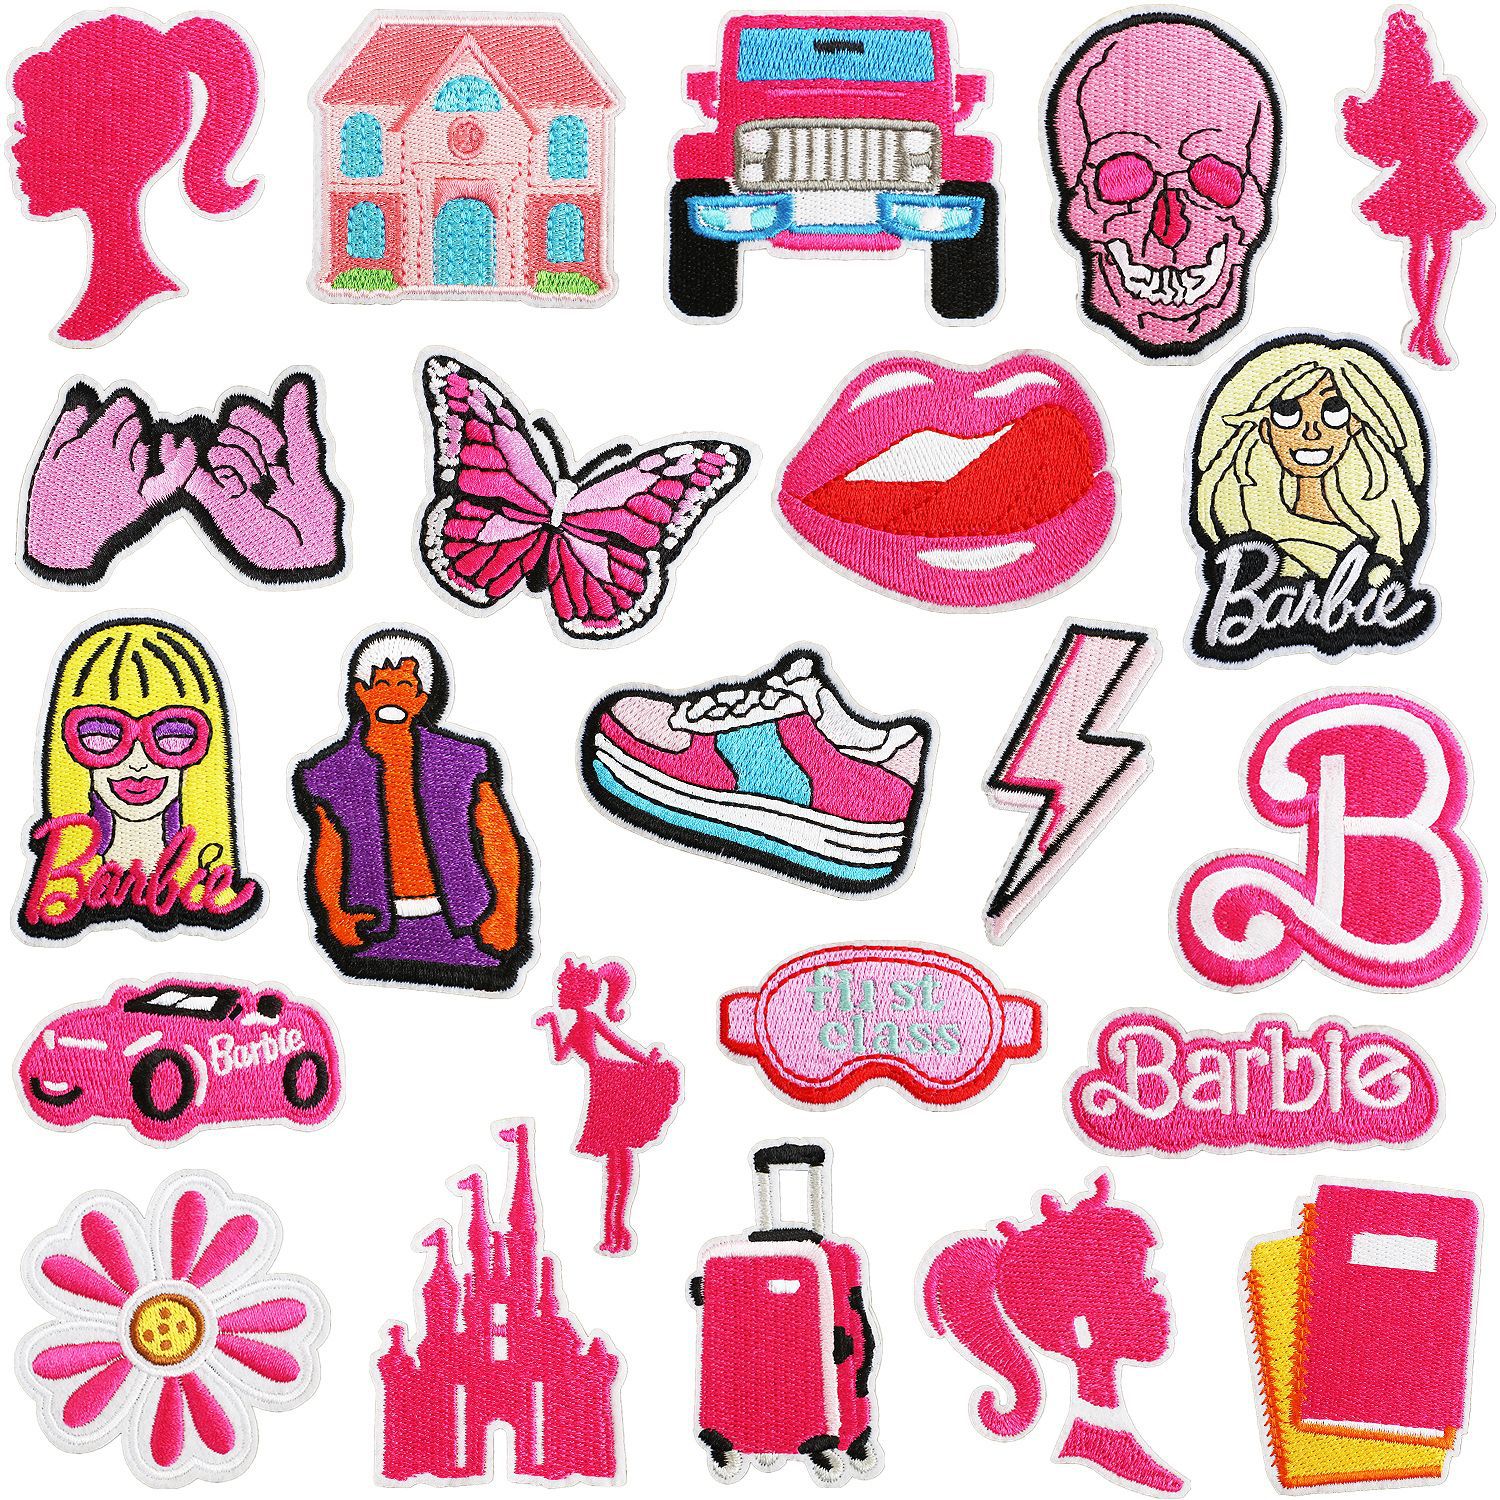 23 Pieces Girls Iron on Patches for Clothing Jackets Assorted Size DIY Sew Pink Castle Embroidered Applique Decorative Repair Patch